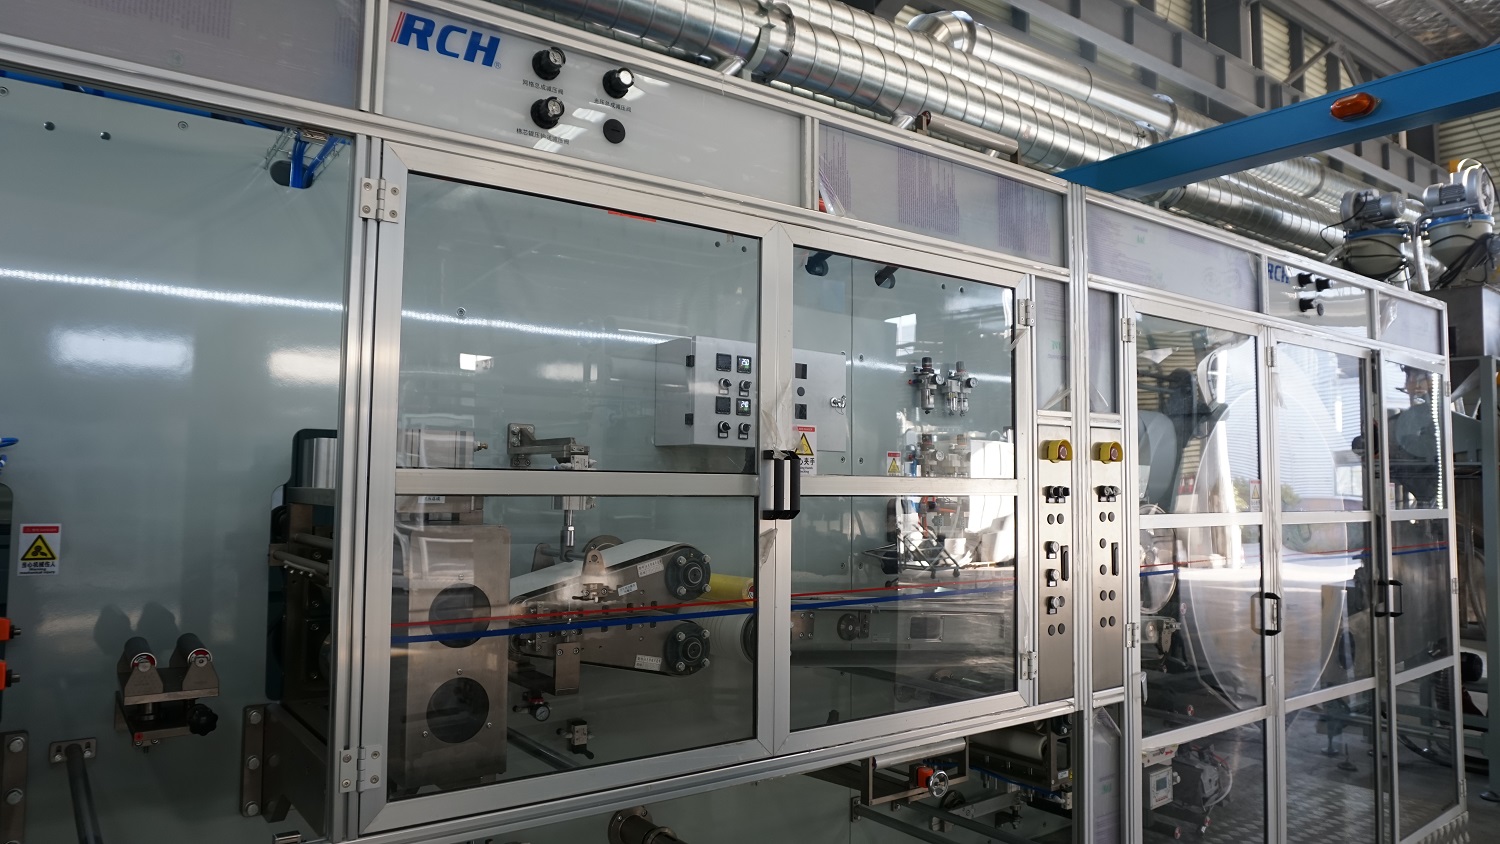 RCH Baby pull-up Pants Machinery